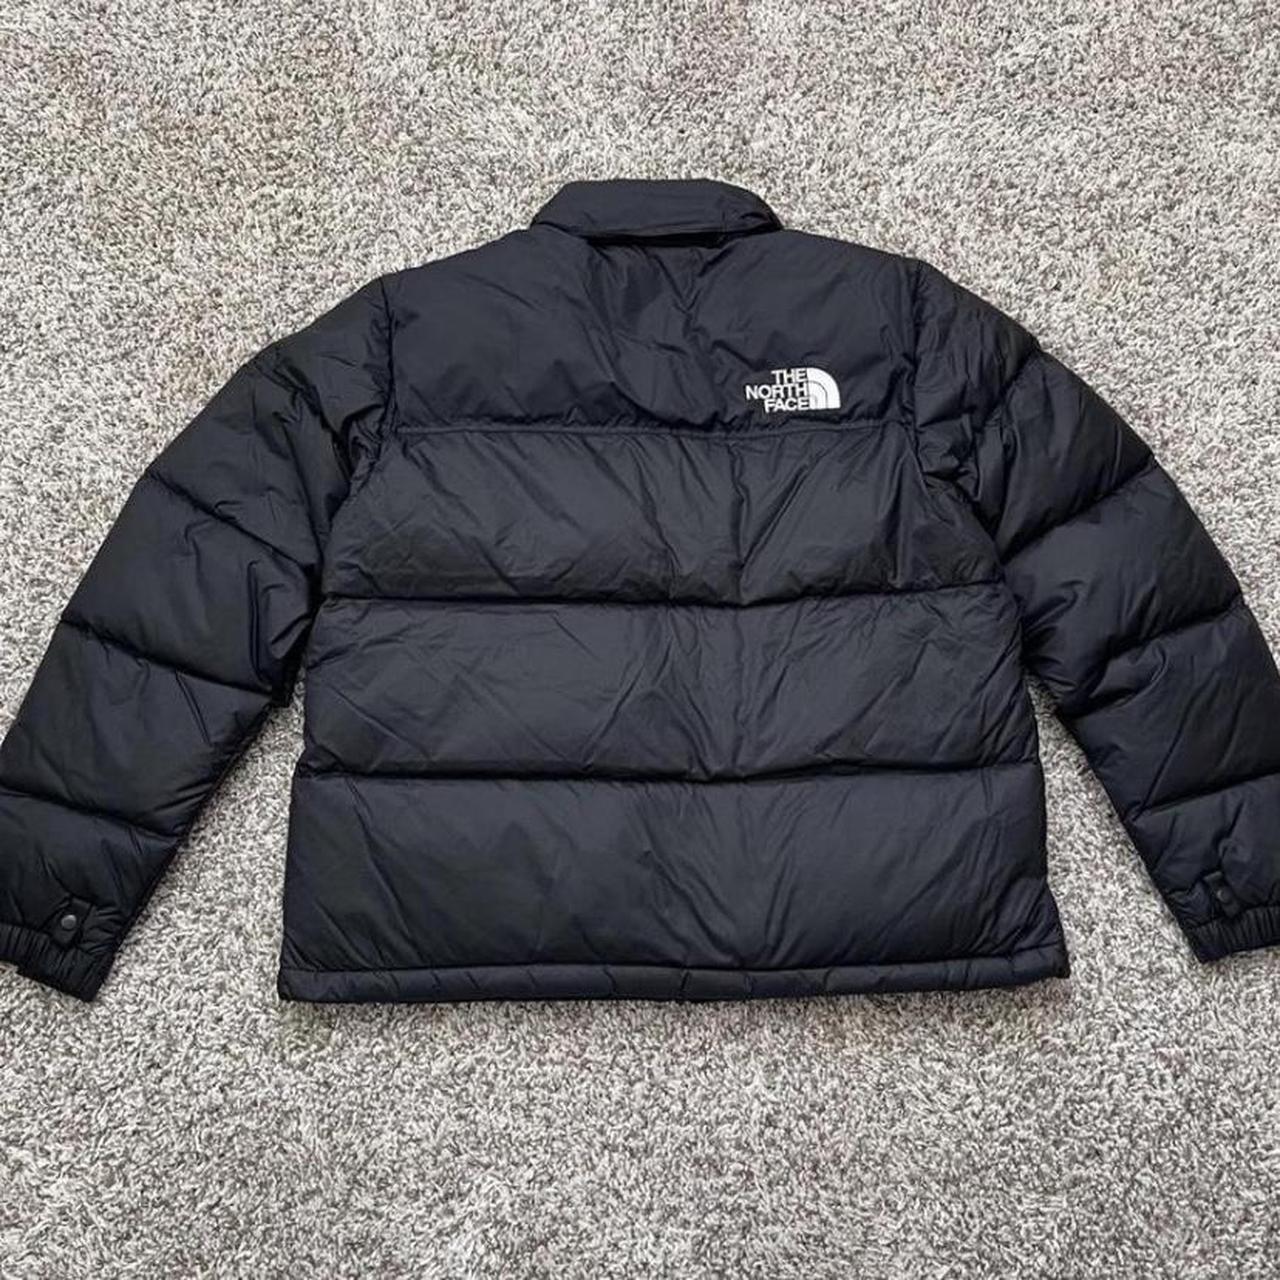 North face puffer DM before buy New - Depop